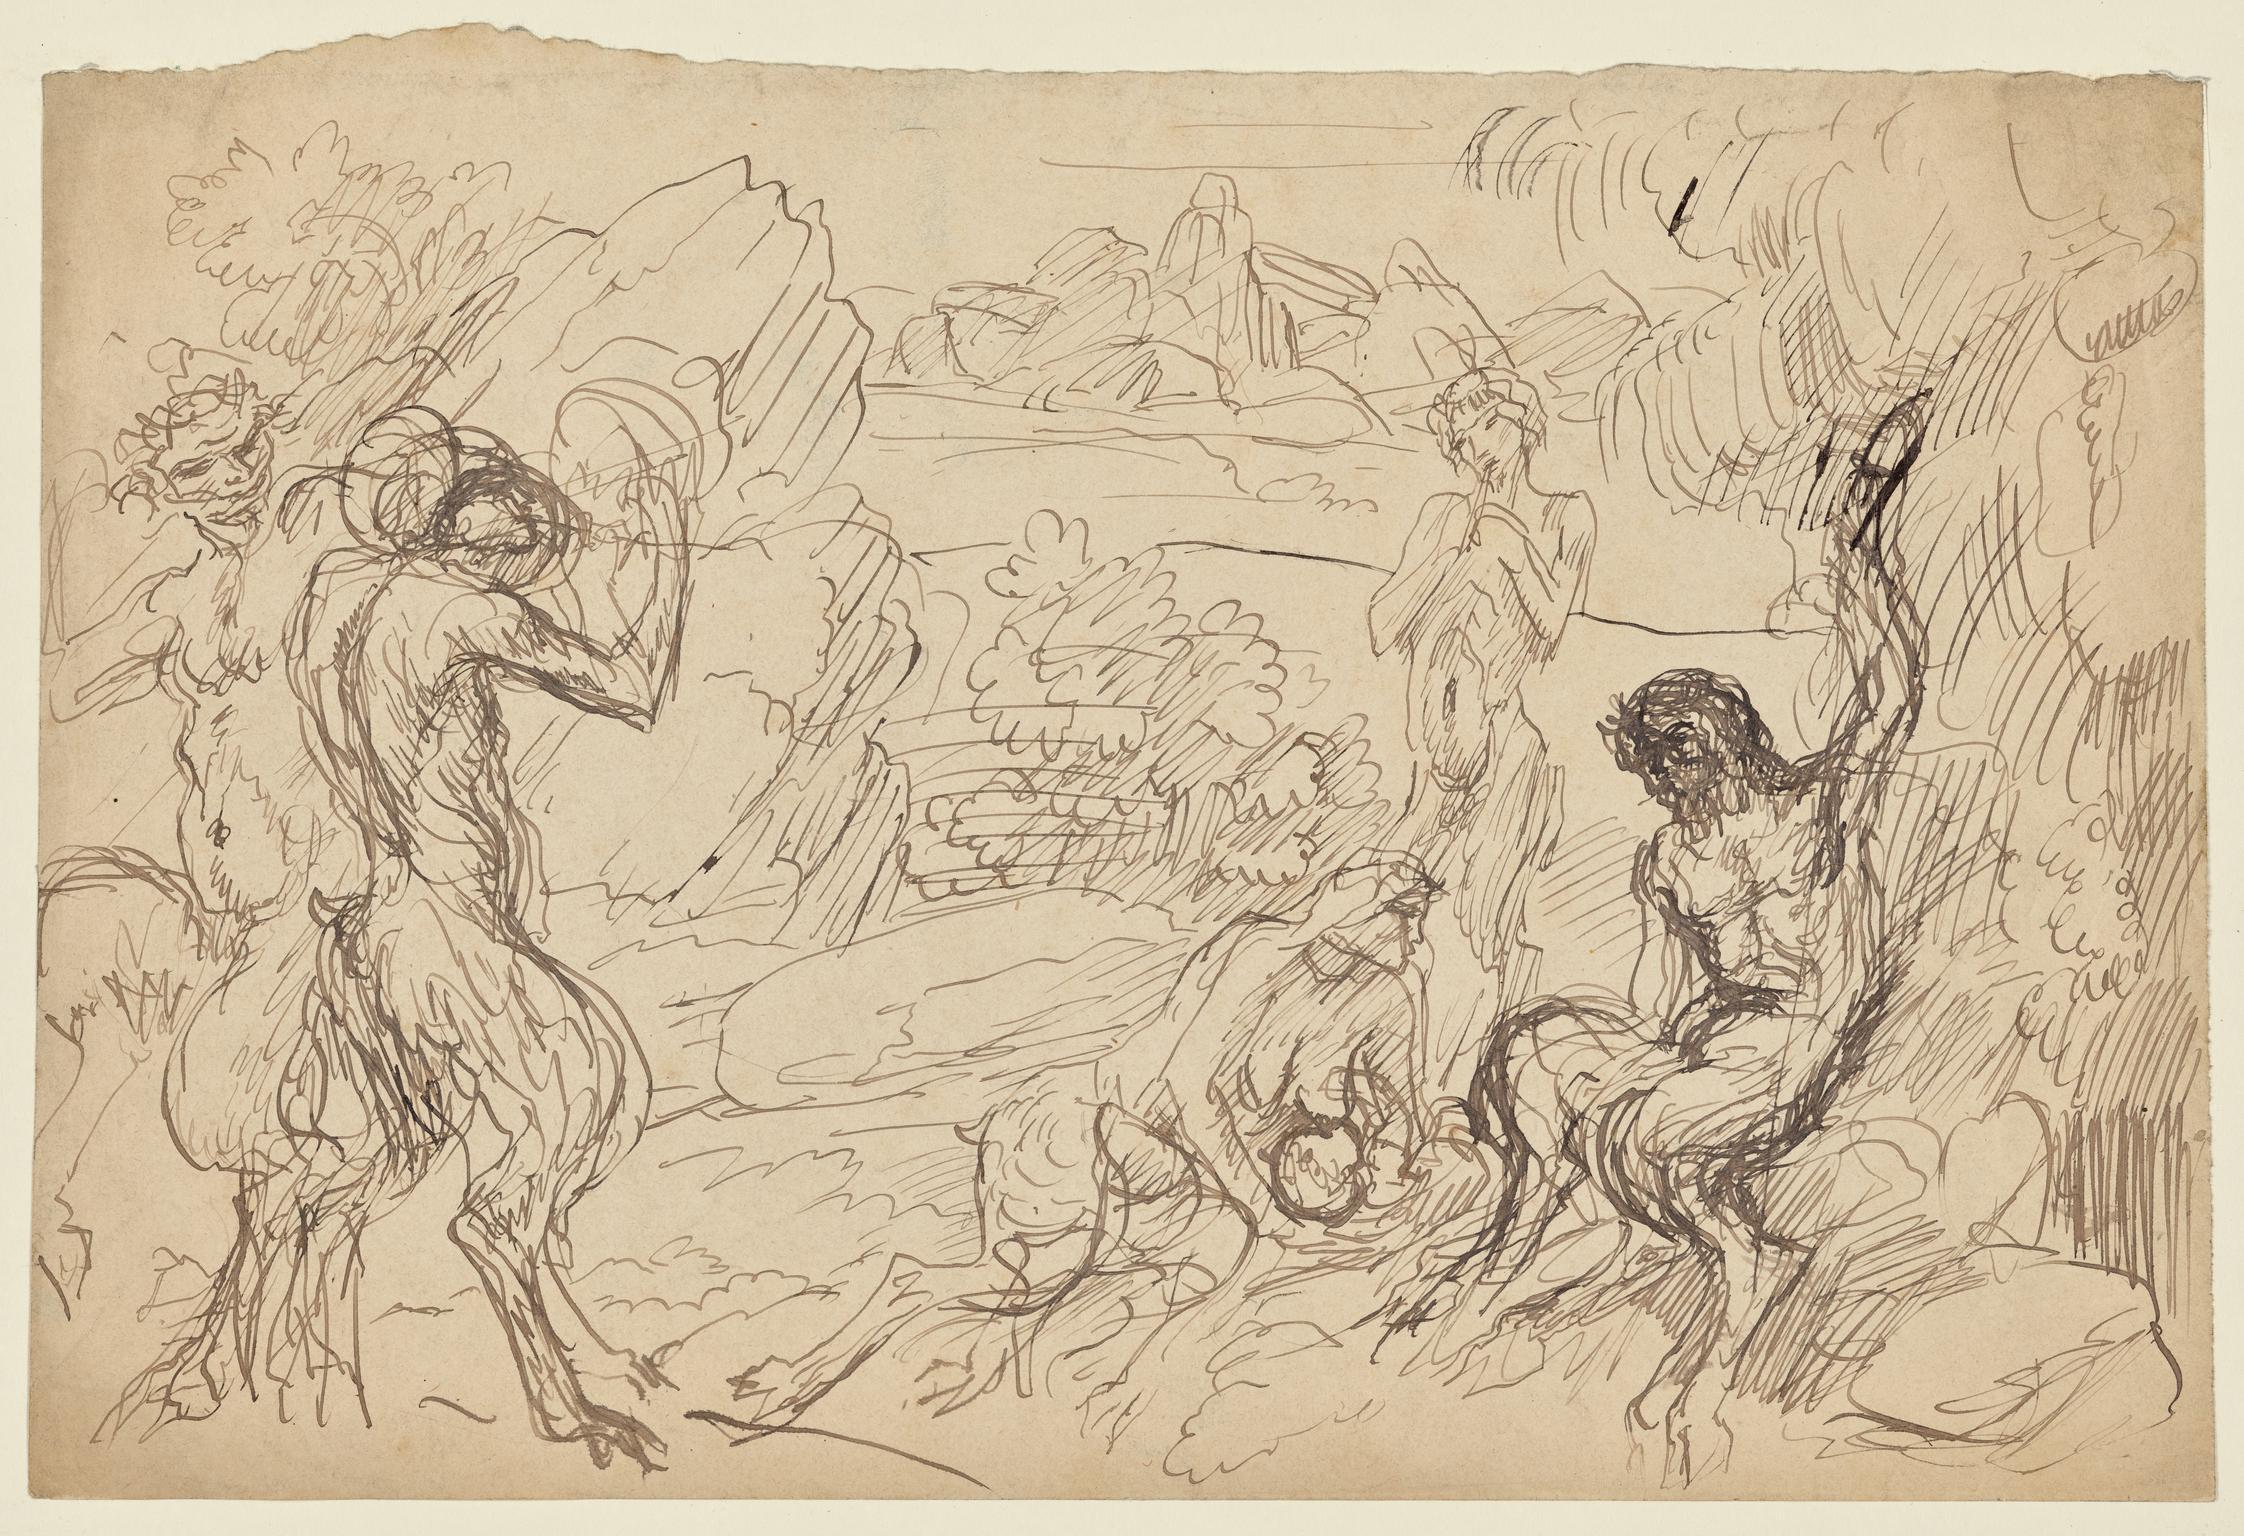 Five Satyrs in a woodland setting